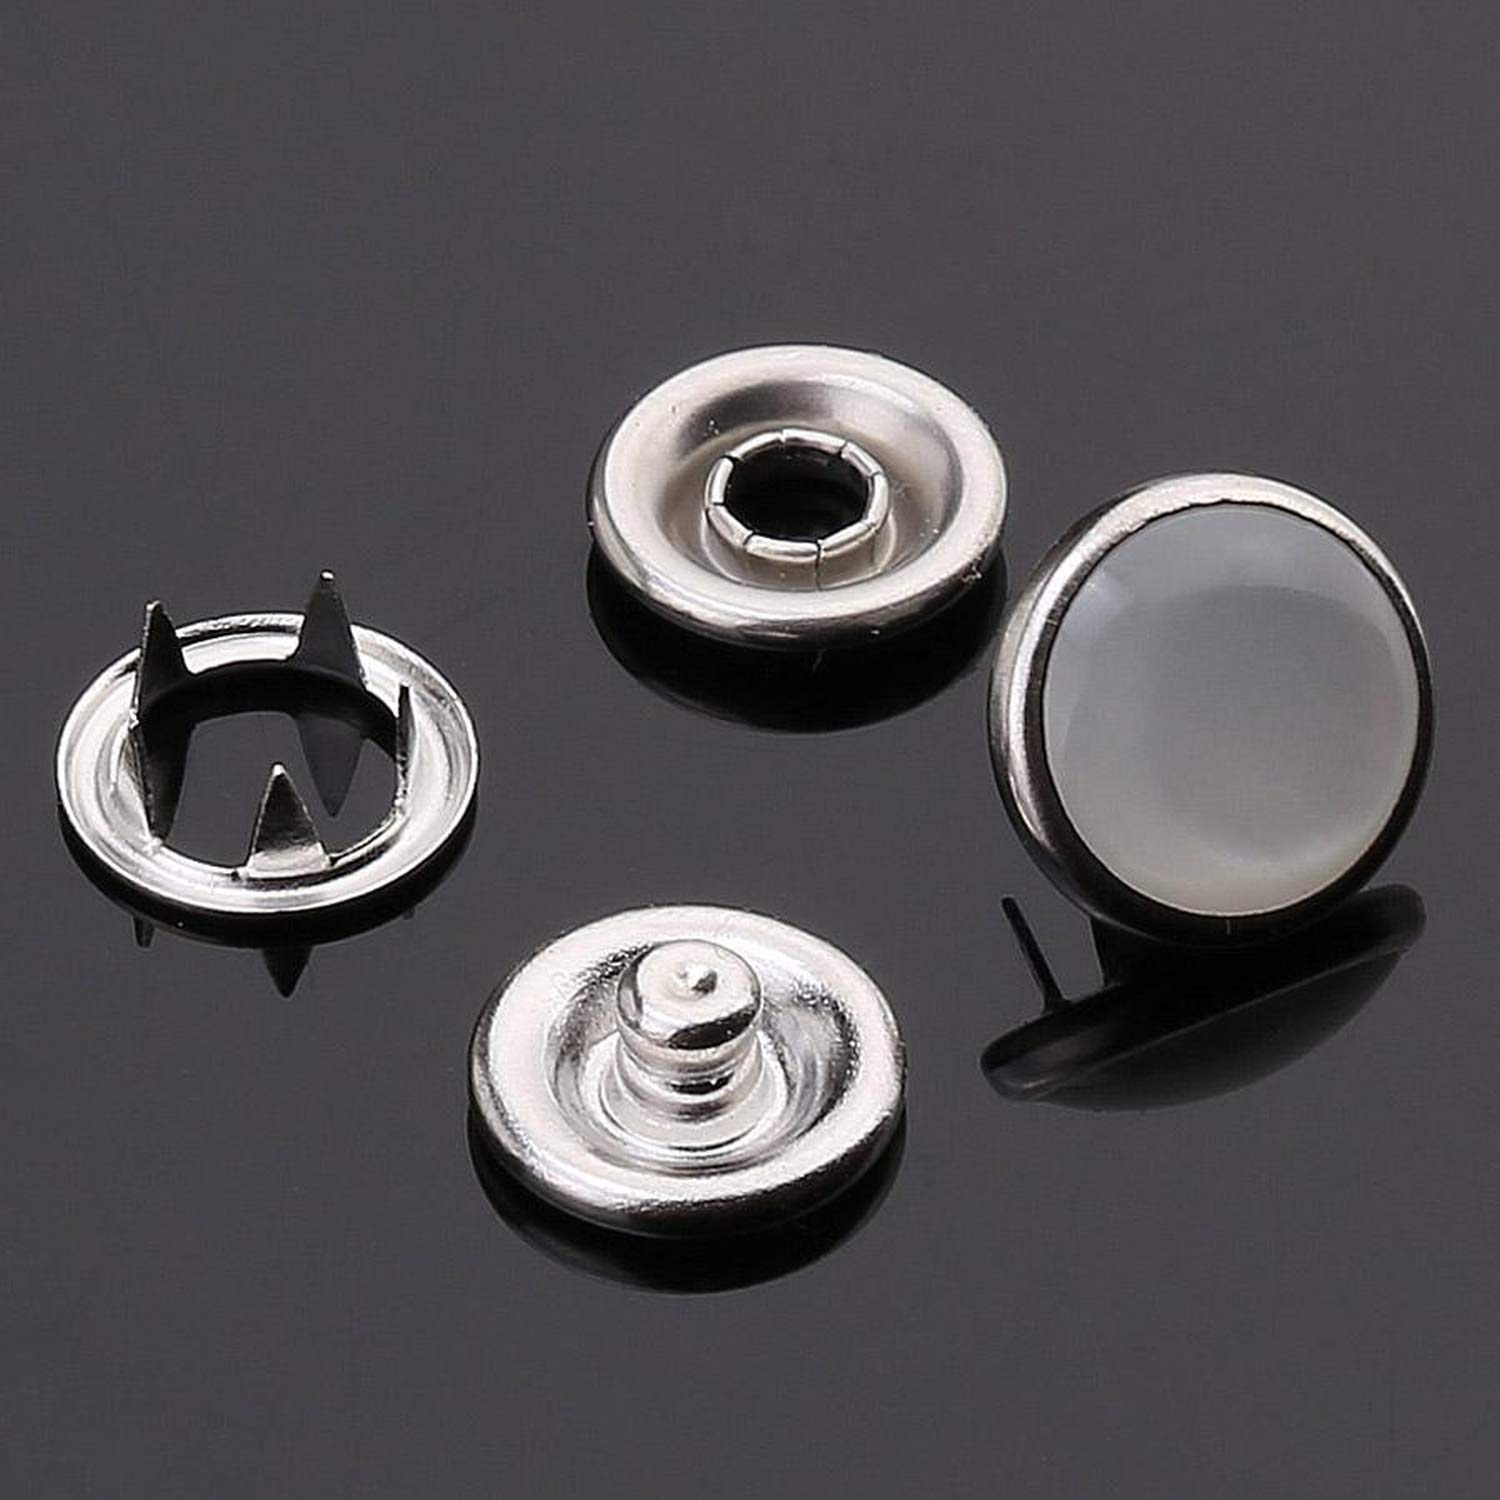 720 sets 4 piece pearl capped prong snap button set with manual grommet machine, diy fastener dies